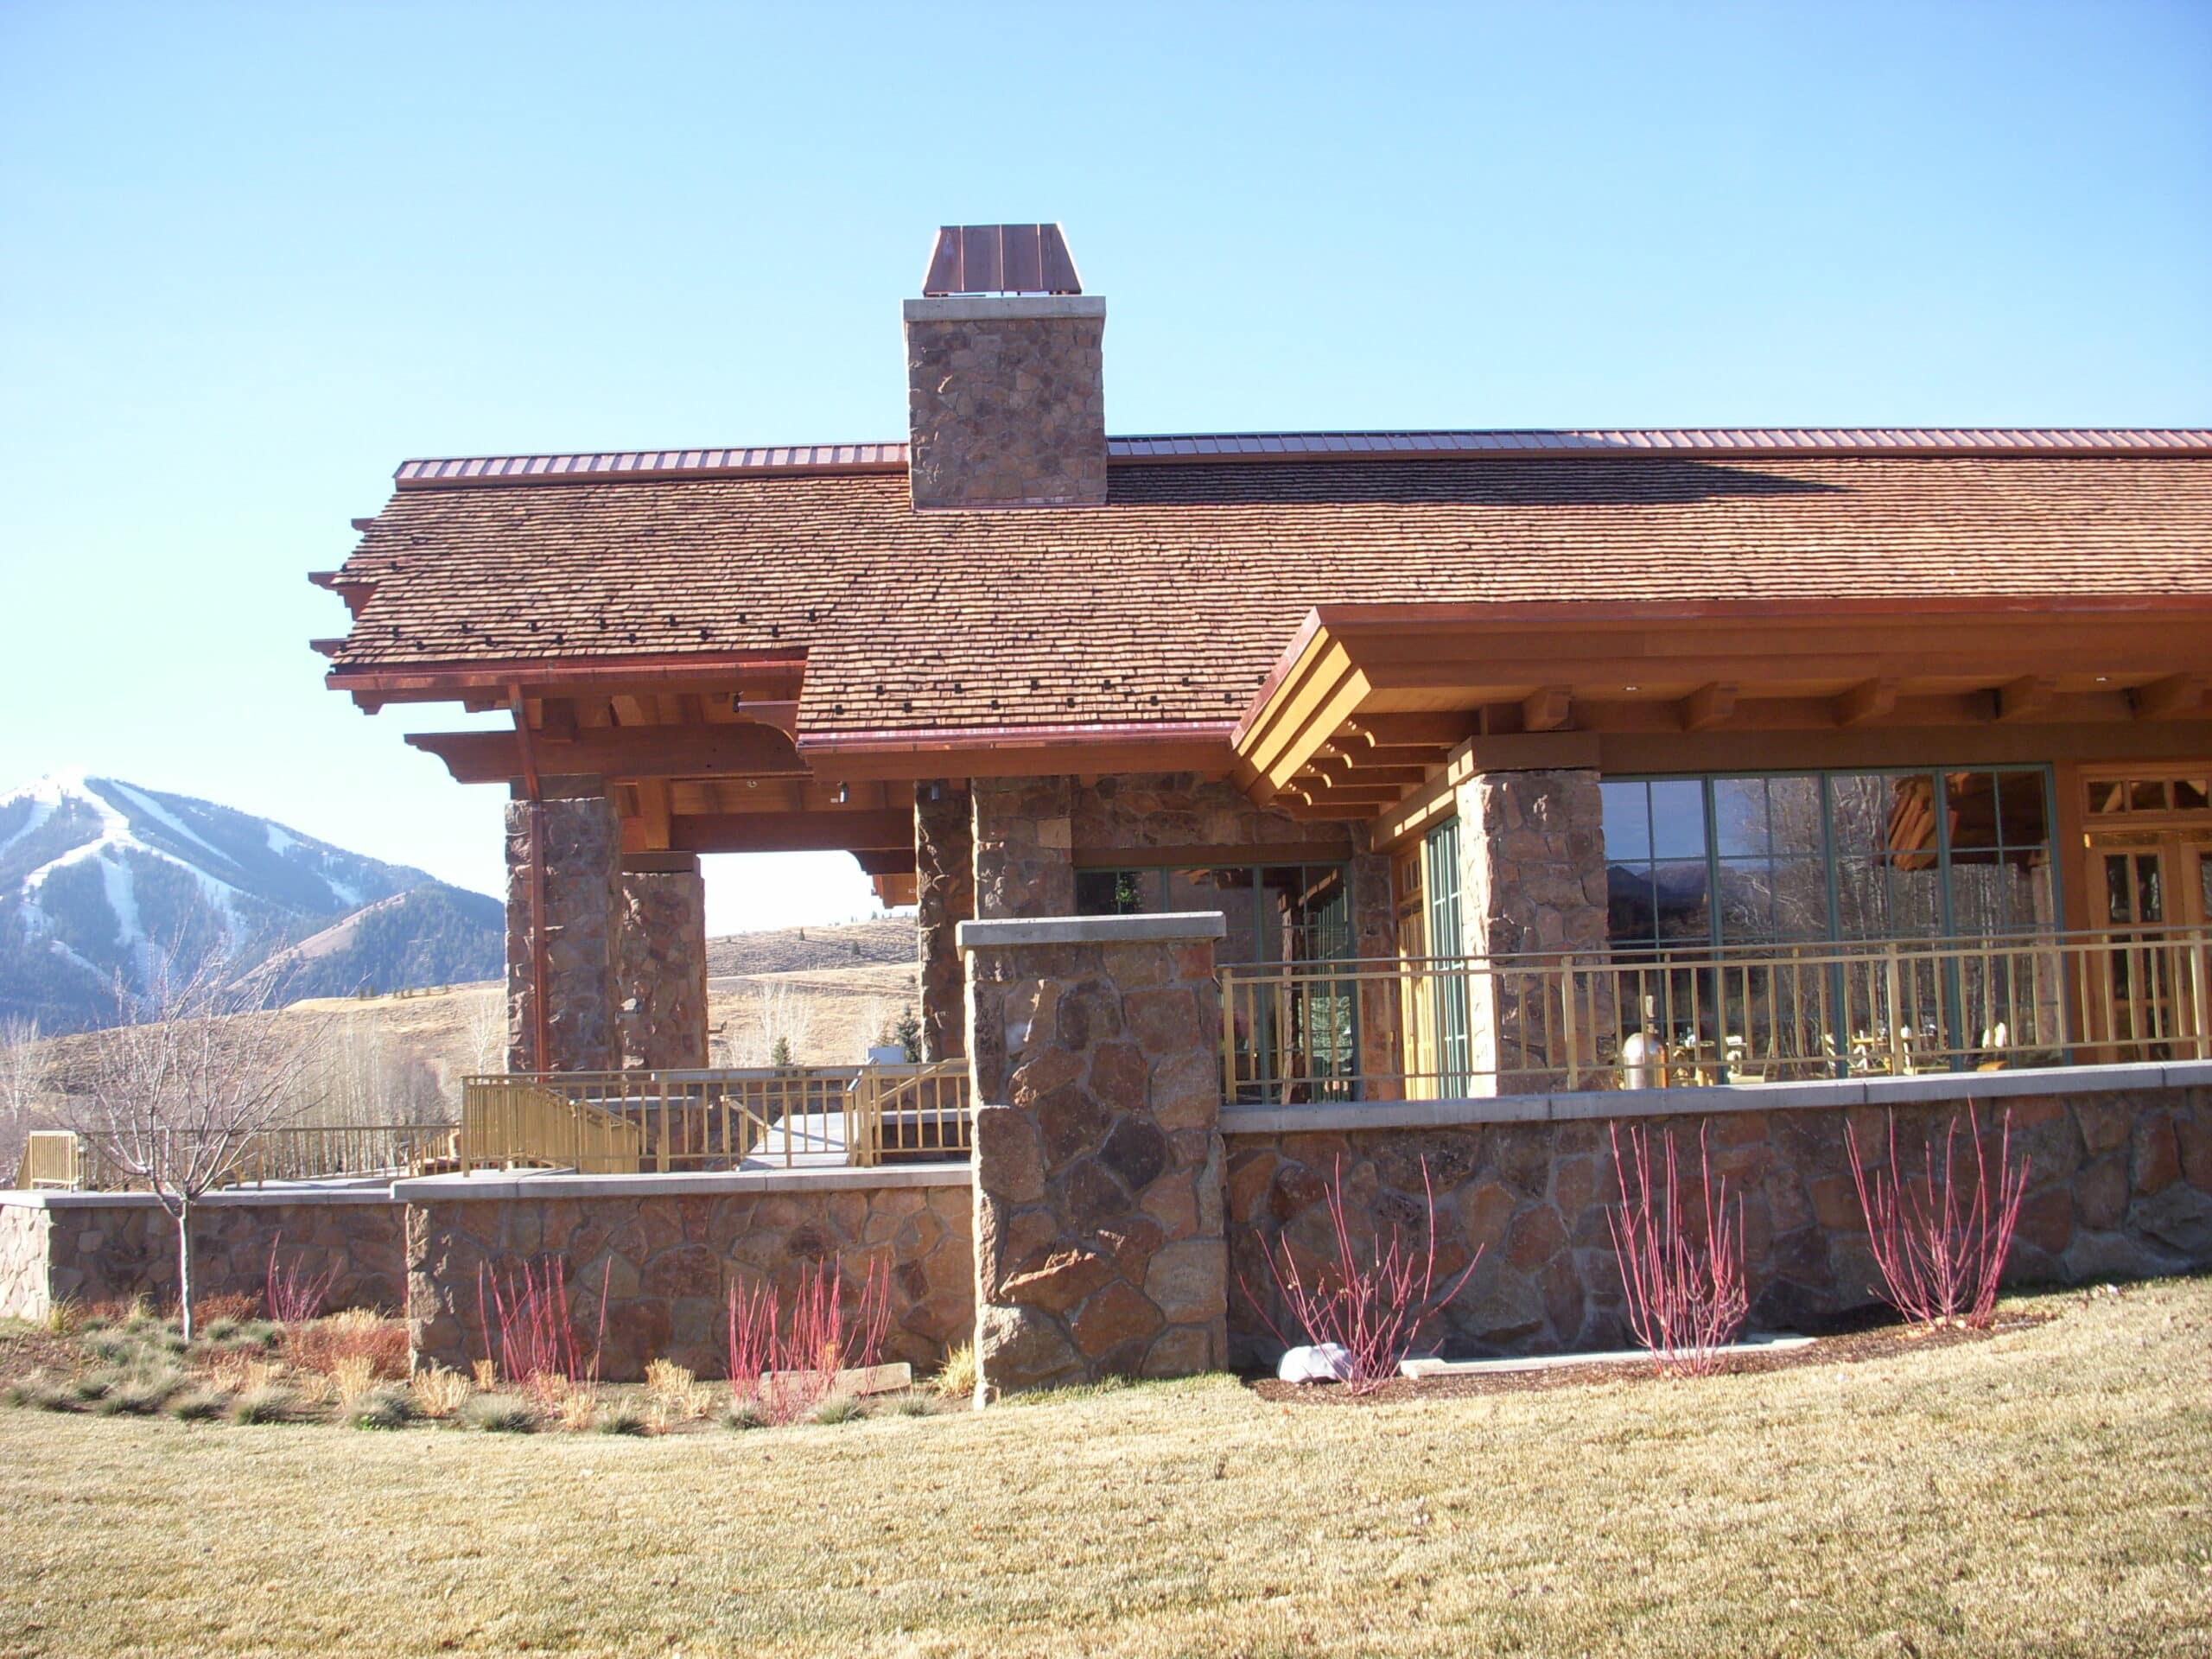 Glued laminated timber Curved Beams, Trusses and Columns manufactured by QB Corporation for The Sun Valley Lodge